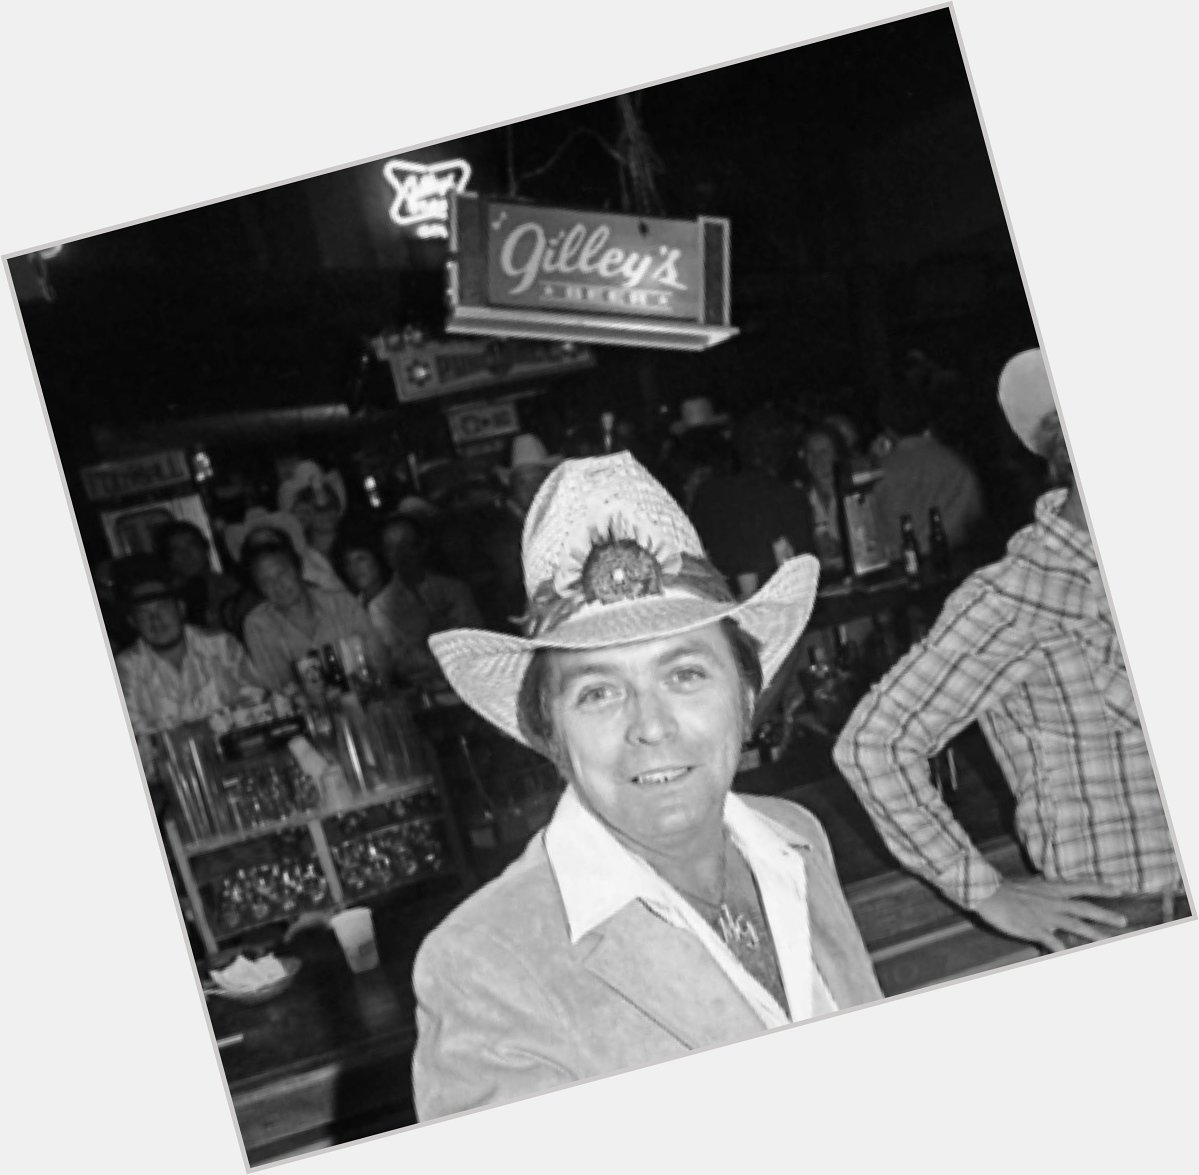 Happy Birthday Mickey Gilley!
What are your favorite Mickey Gilley songs?  